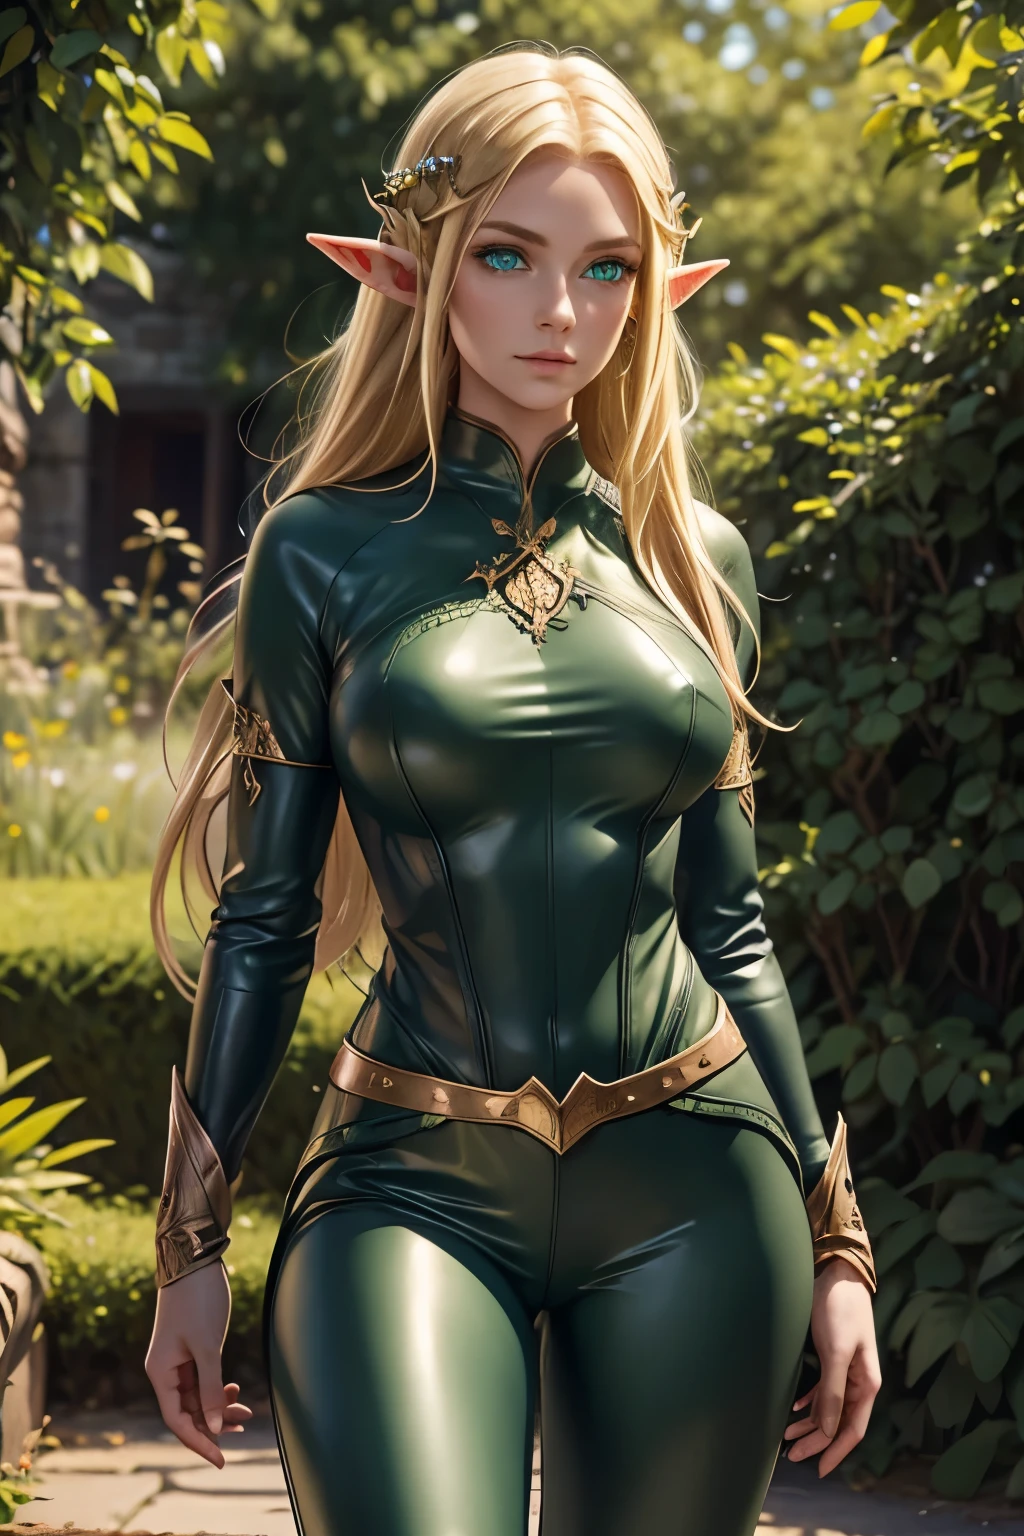 medieval setting, full view of body, (detailed elf ear, 1 woman, elven featured face, beautiful green eyes, blonde hair), leather armor, black leather pants, 